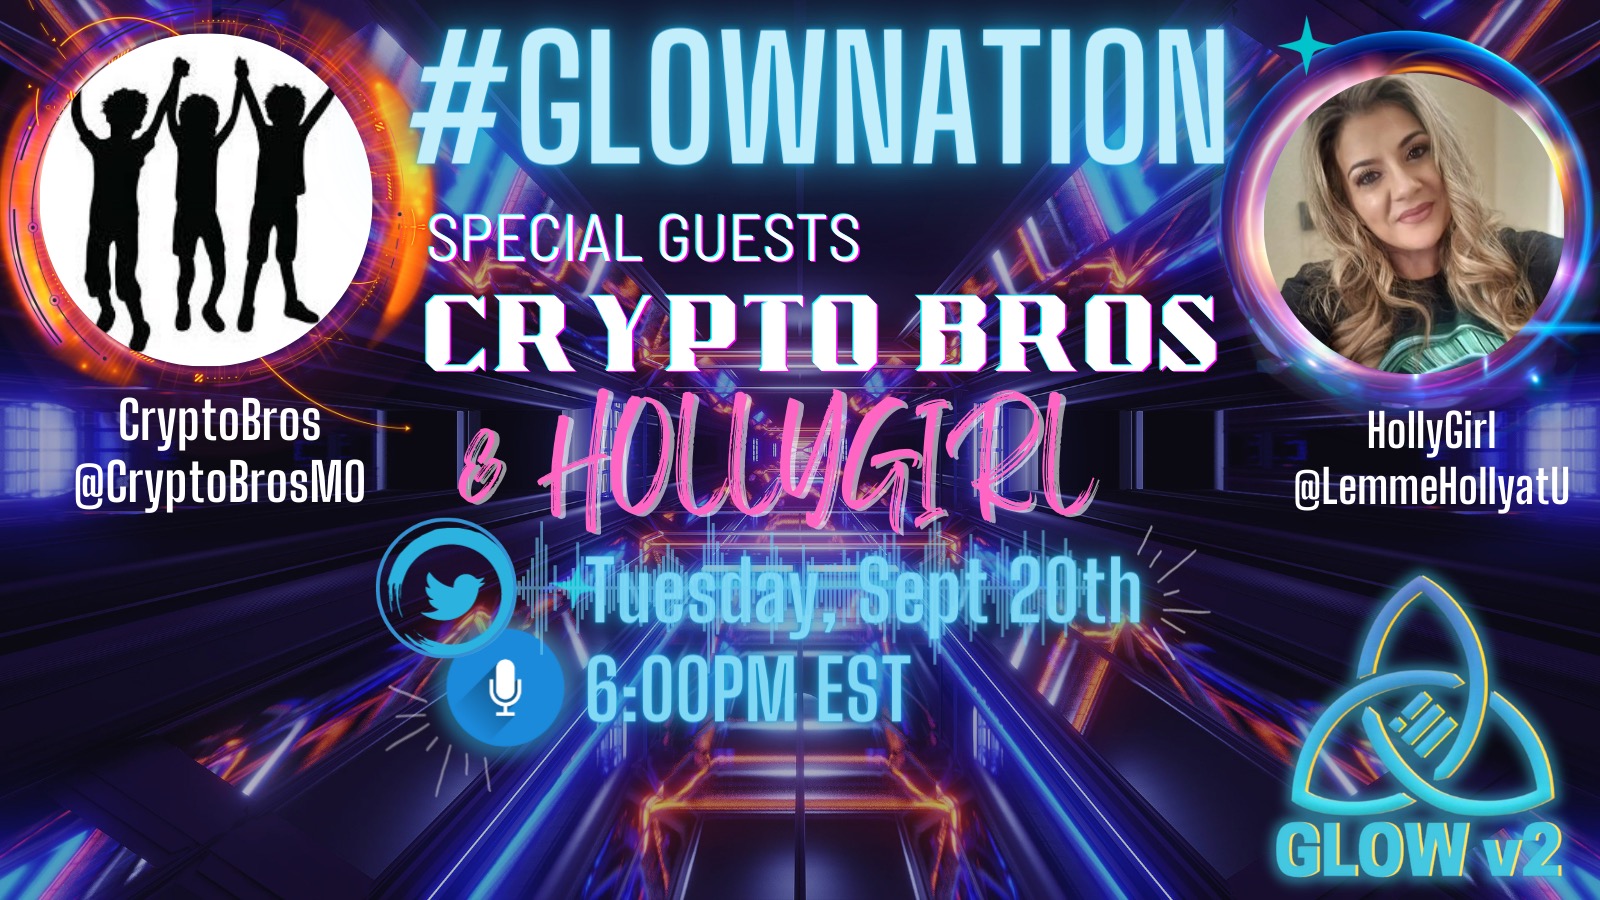 Glow Nation Crypto Bros and Holly Poem